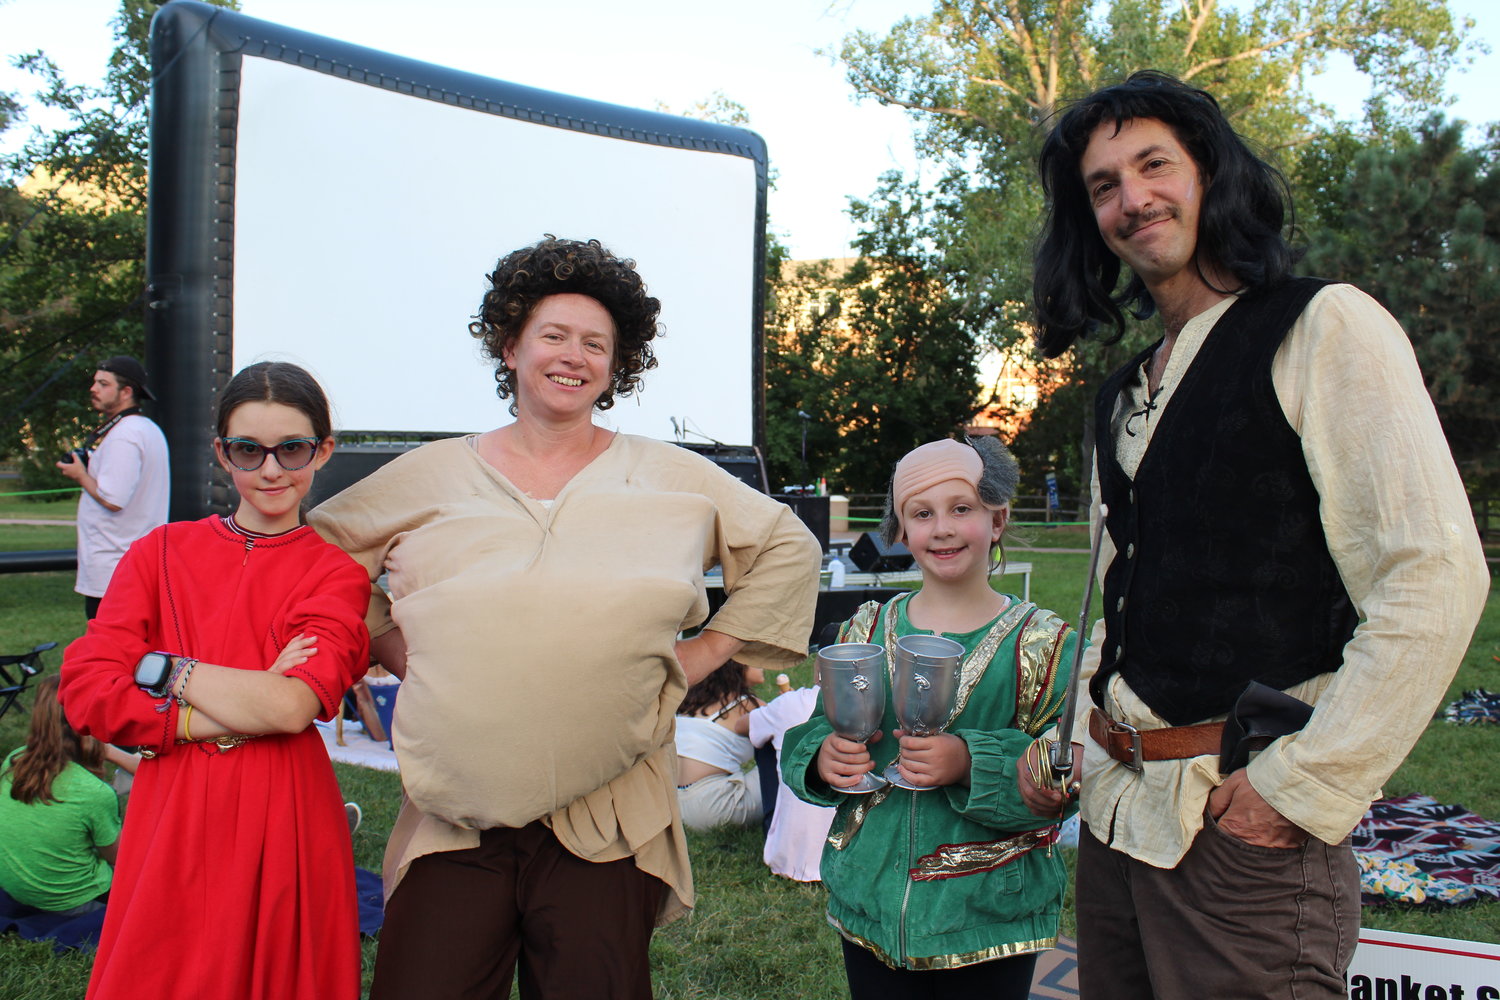 The Wunsch family dresses as characters from &quot;The Princess Bride&quot; at Movies &amp; Music in the Park Aug. 12 at Parfet Park. From left, 11-year-old Ayalah is Princess Buttercup, Heidi is Fezzik, 8-year-old Dafna is Vizzini, and Assaf is Inigo Montoya.